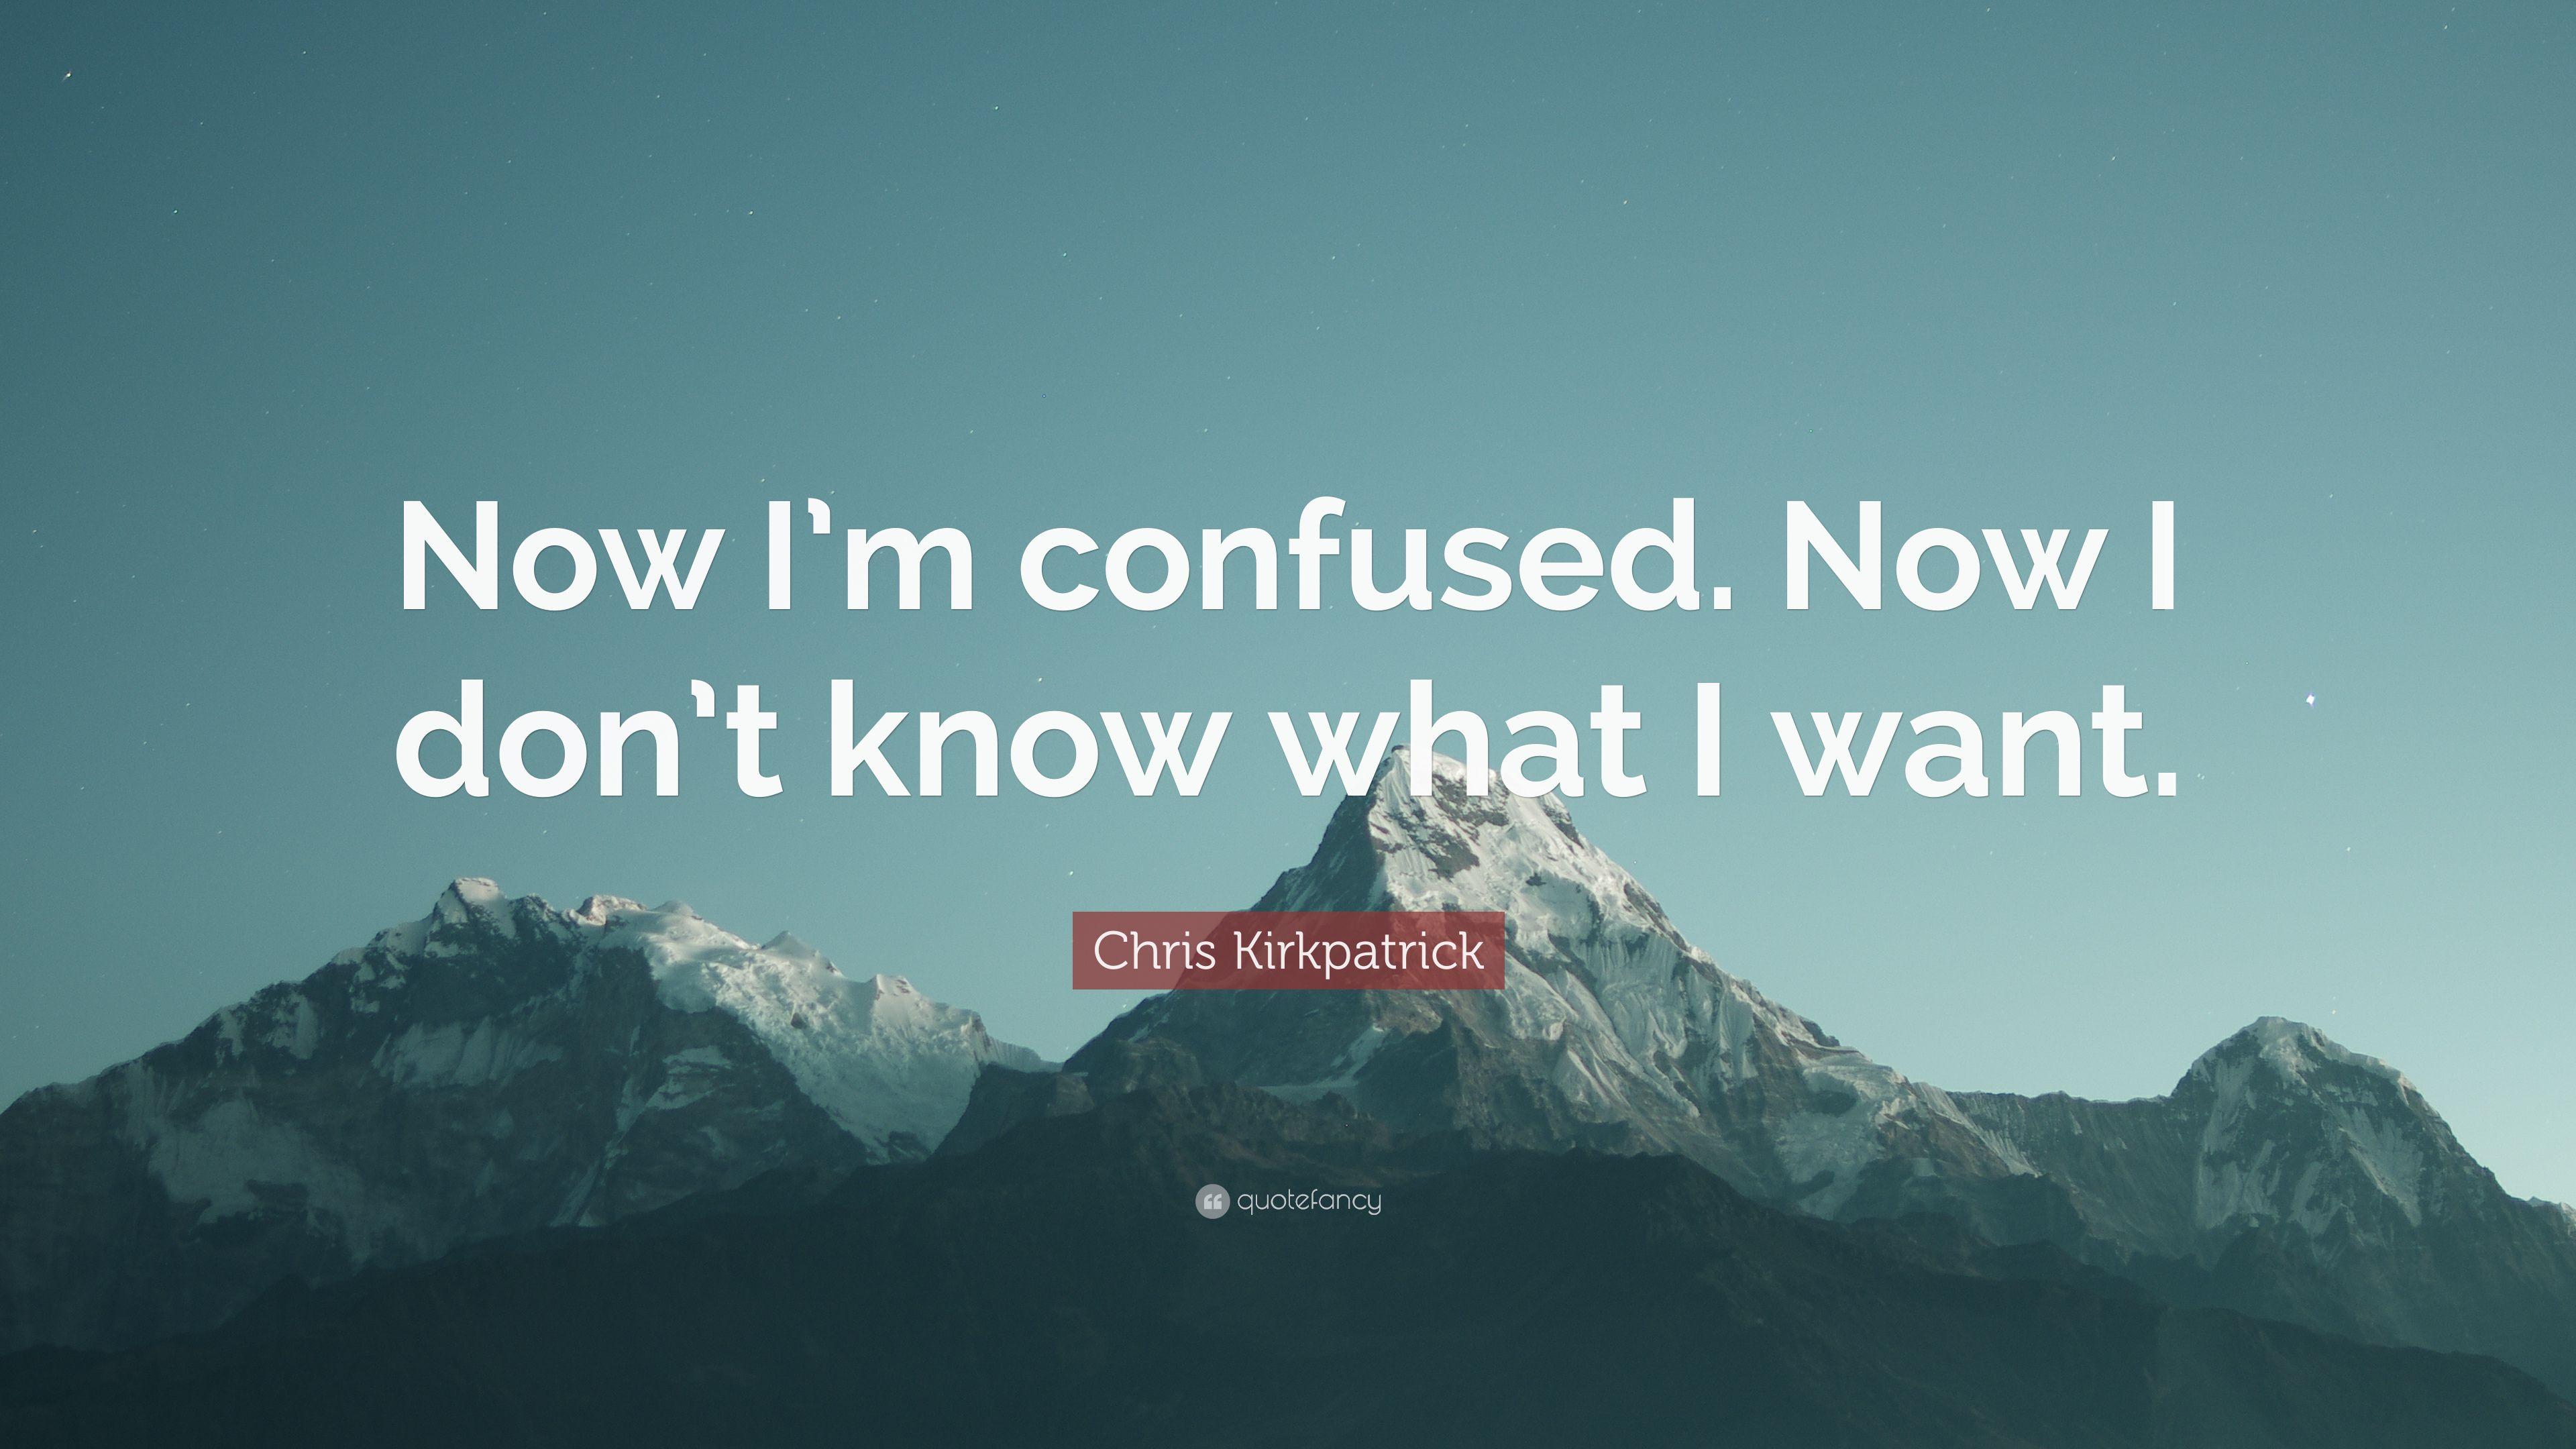 Chris Kirkpatrick Quote: “Now I'm confused. Now I don't know what